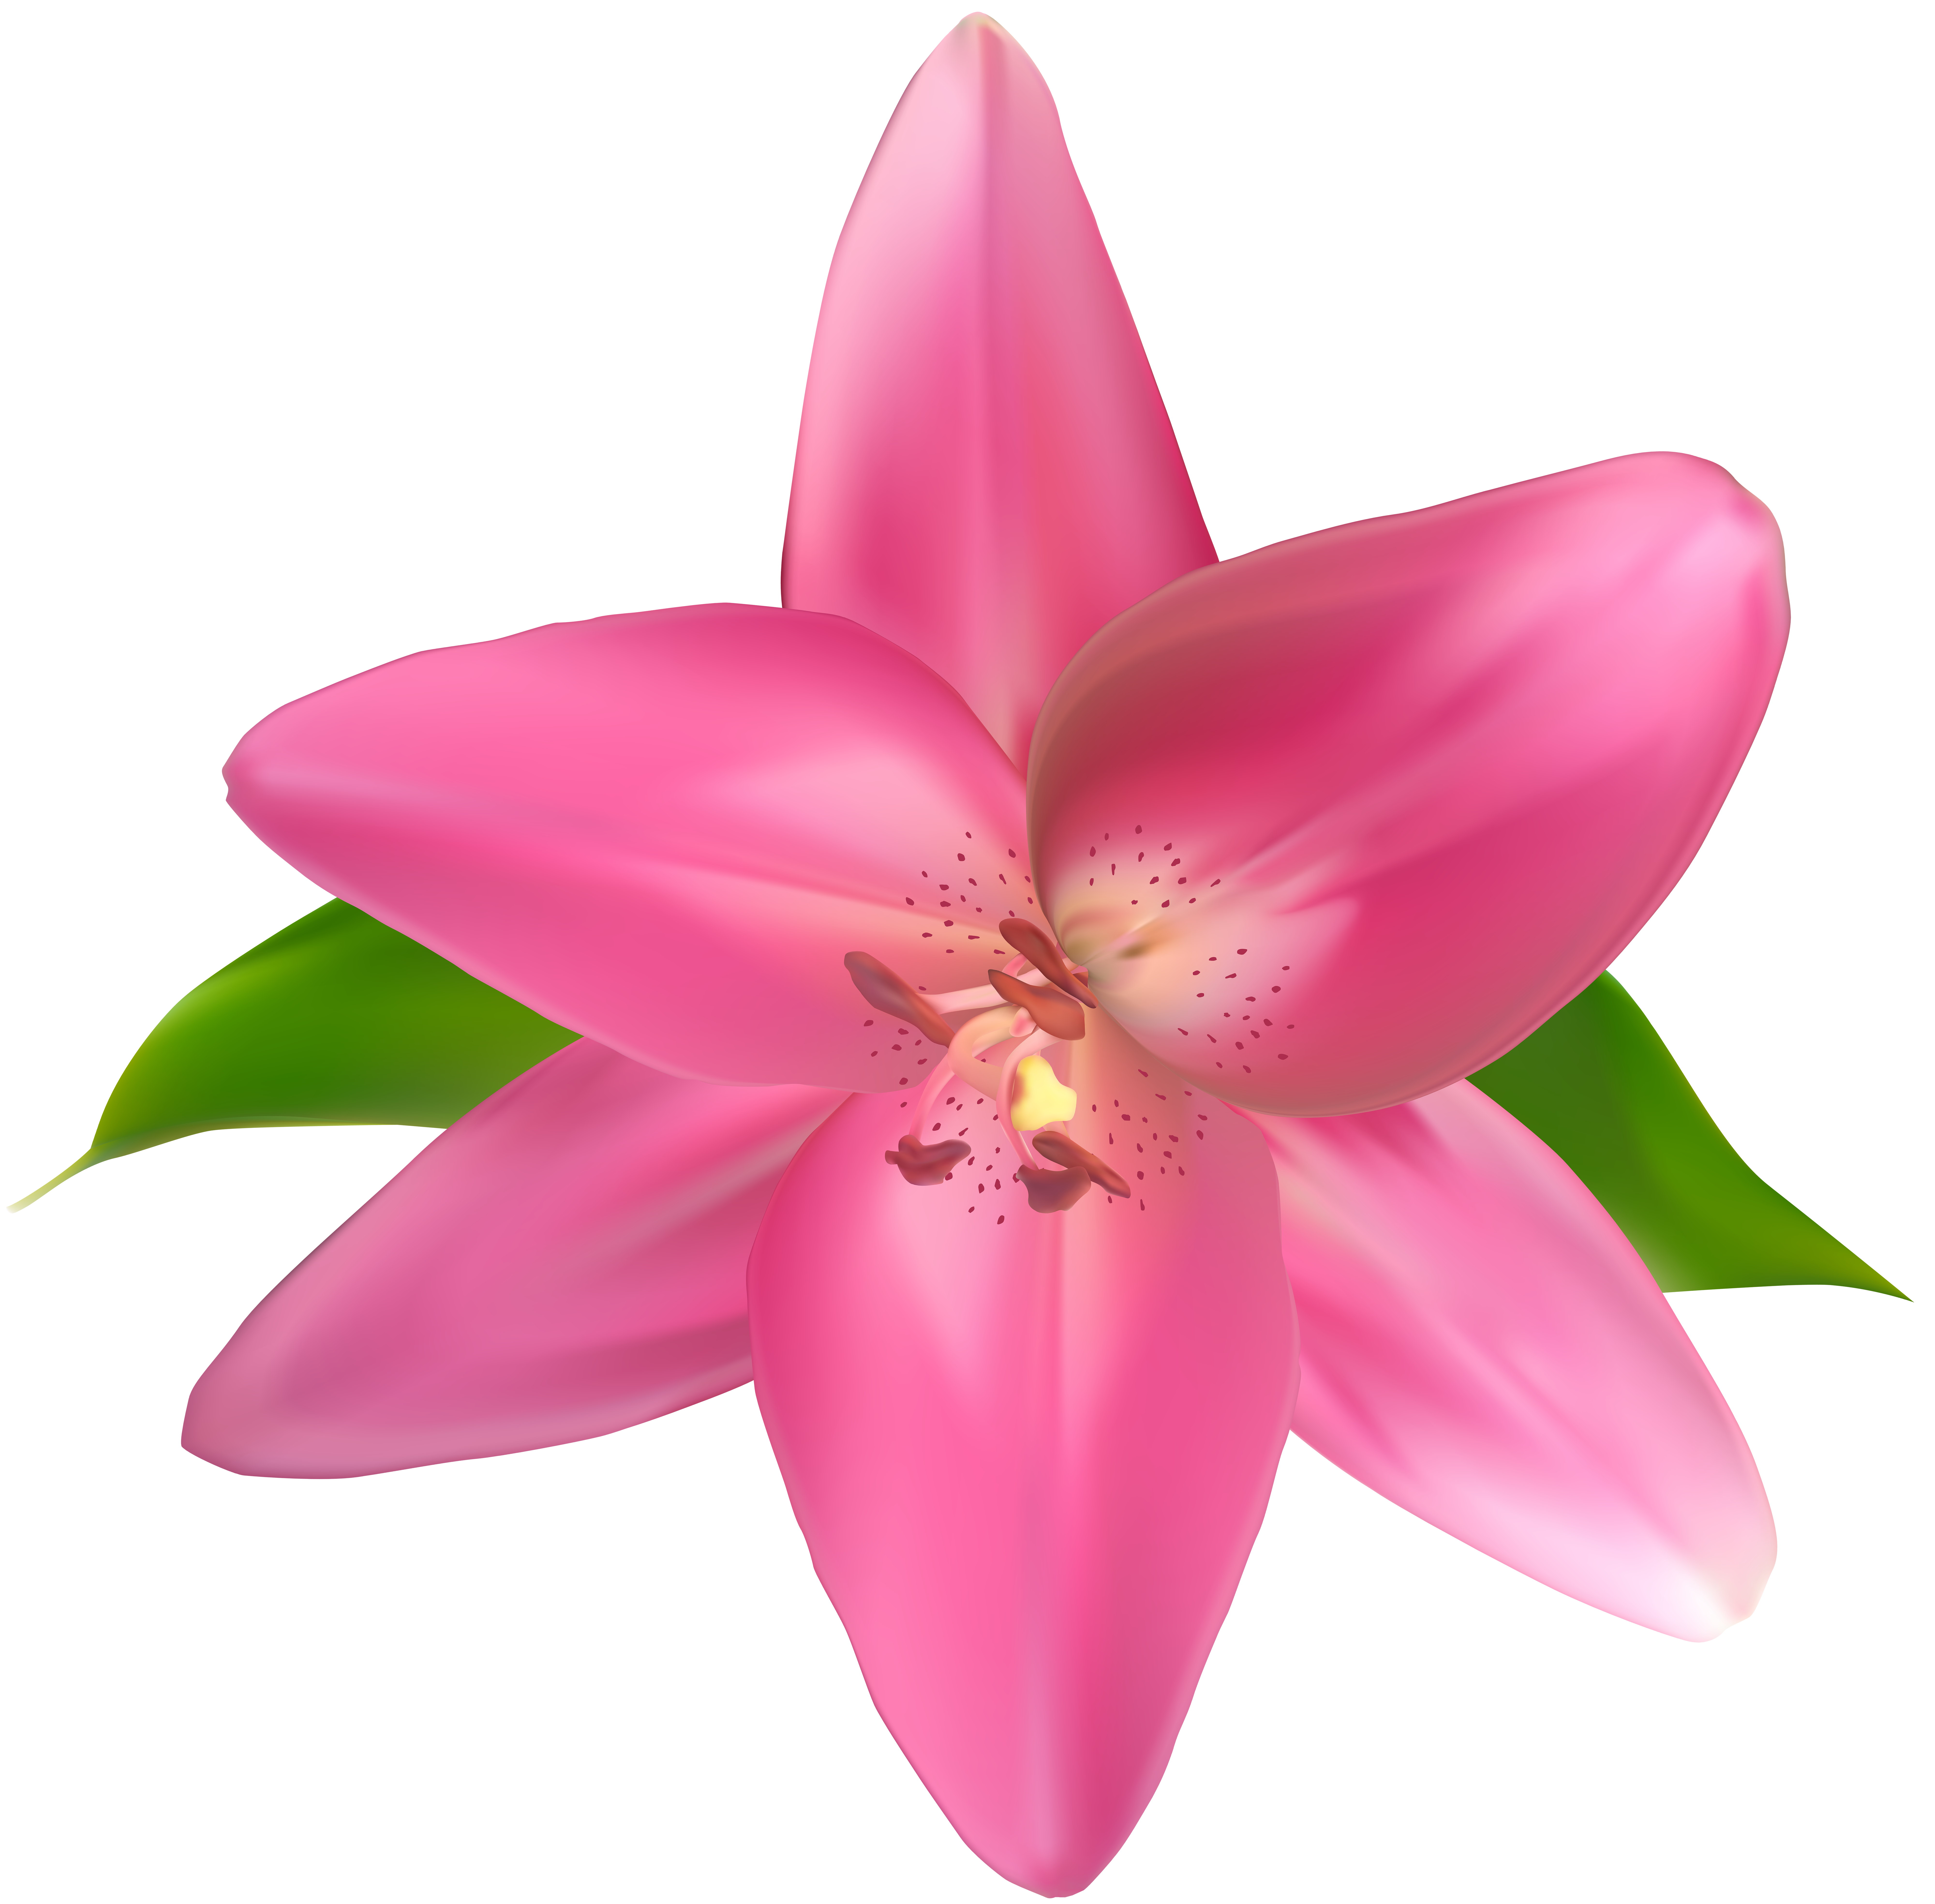 lily clipart pomegranate flower